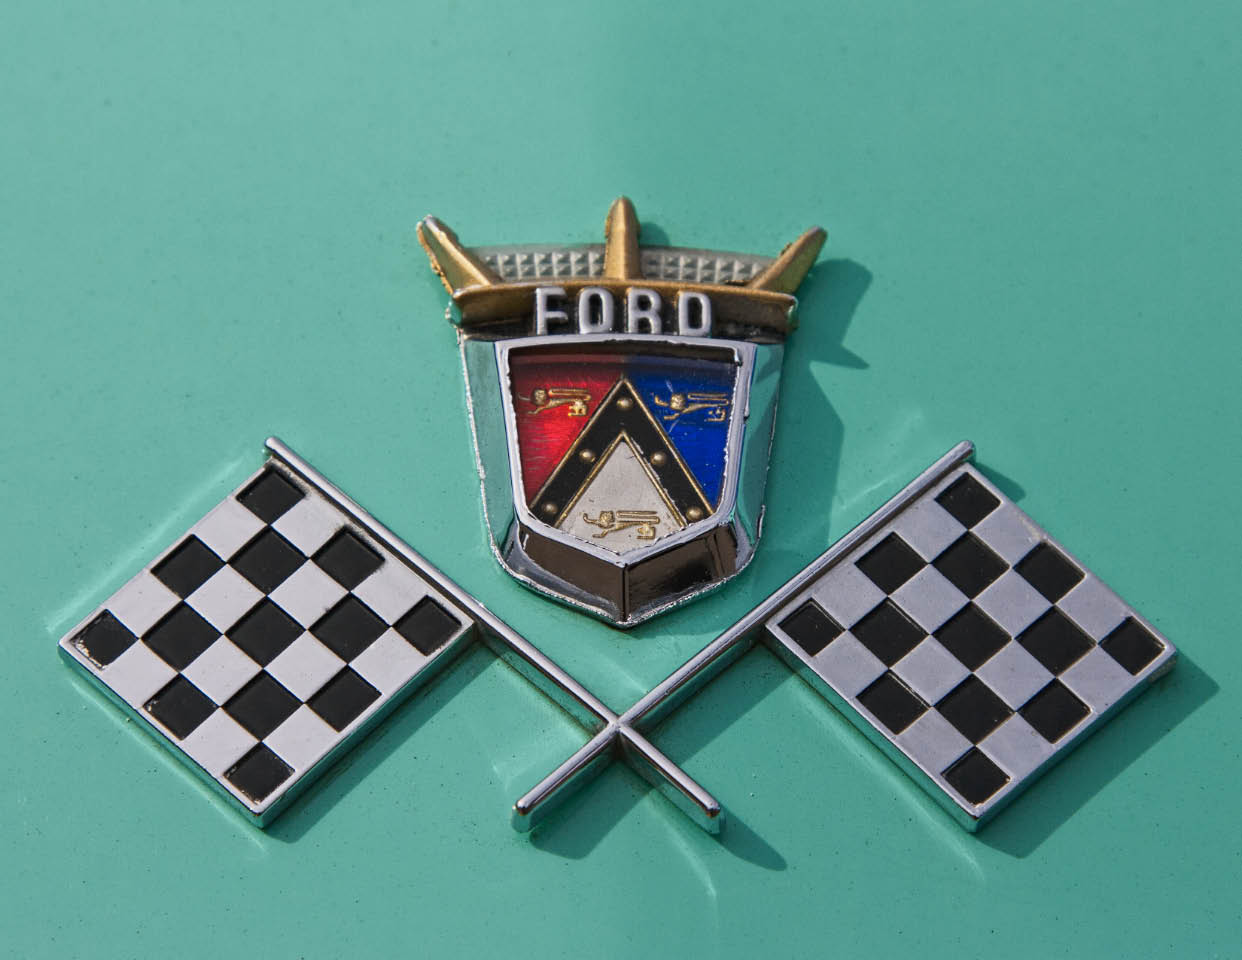 Guess the year and model of vehicle this emblem is from...